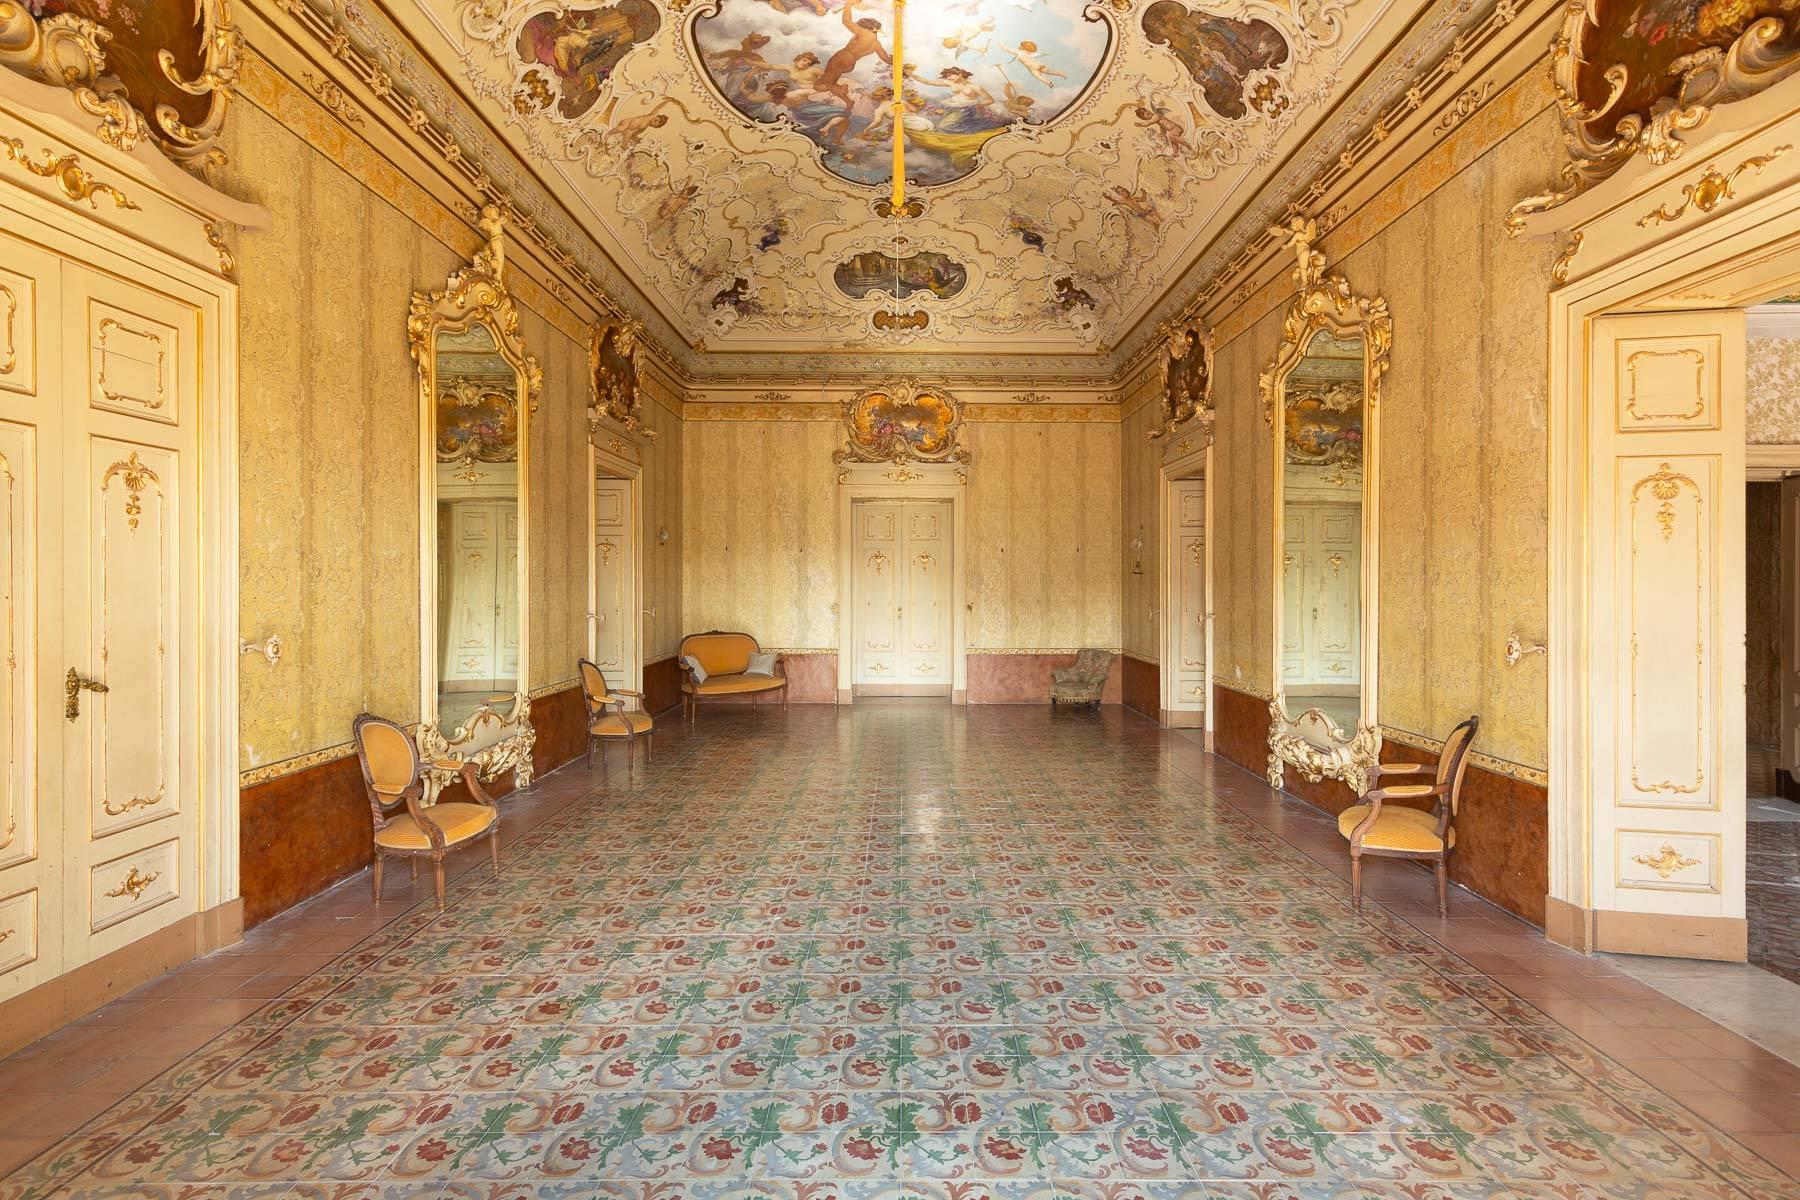 Noble Palace in Palazzolo Acreide - 1